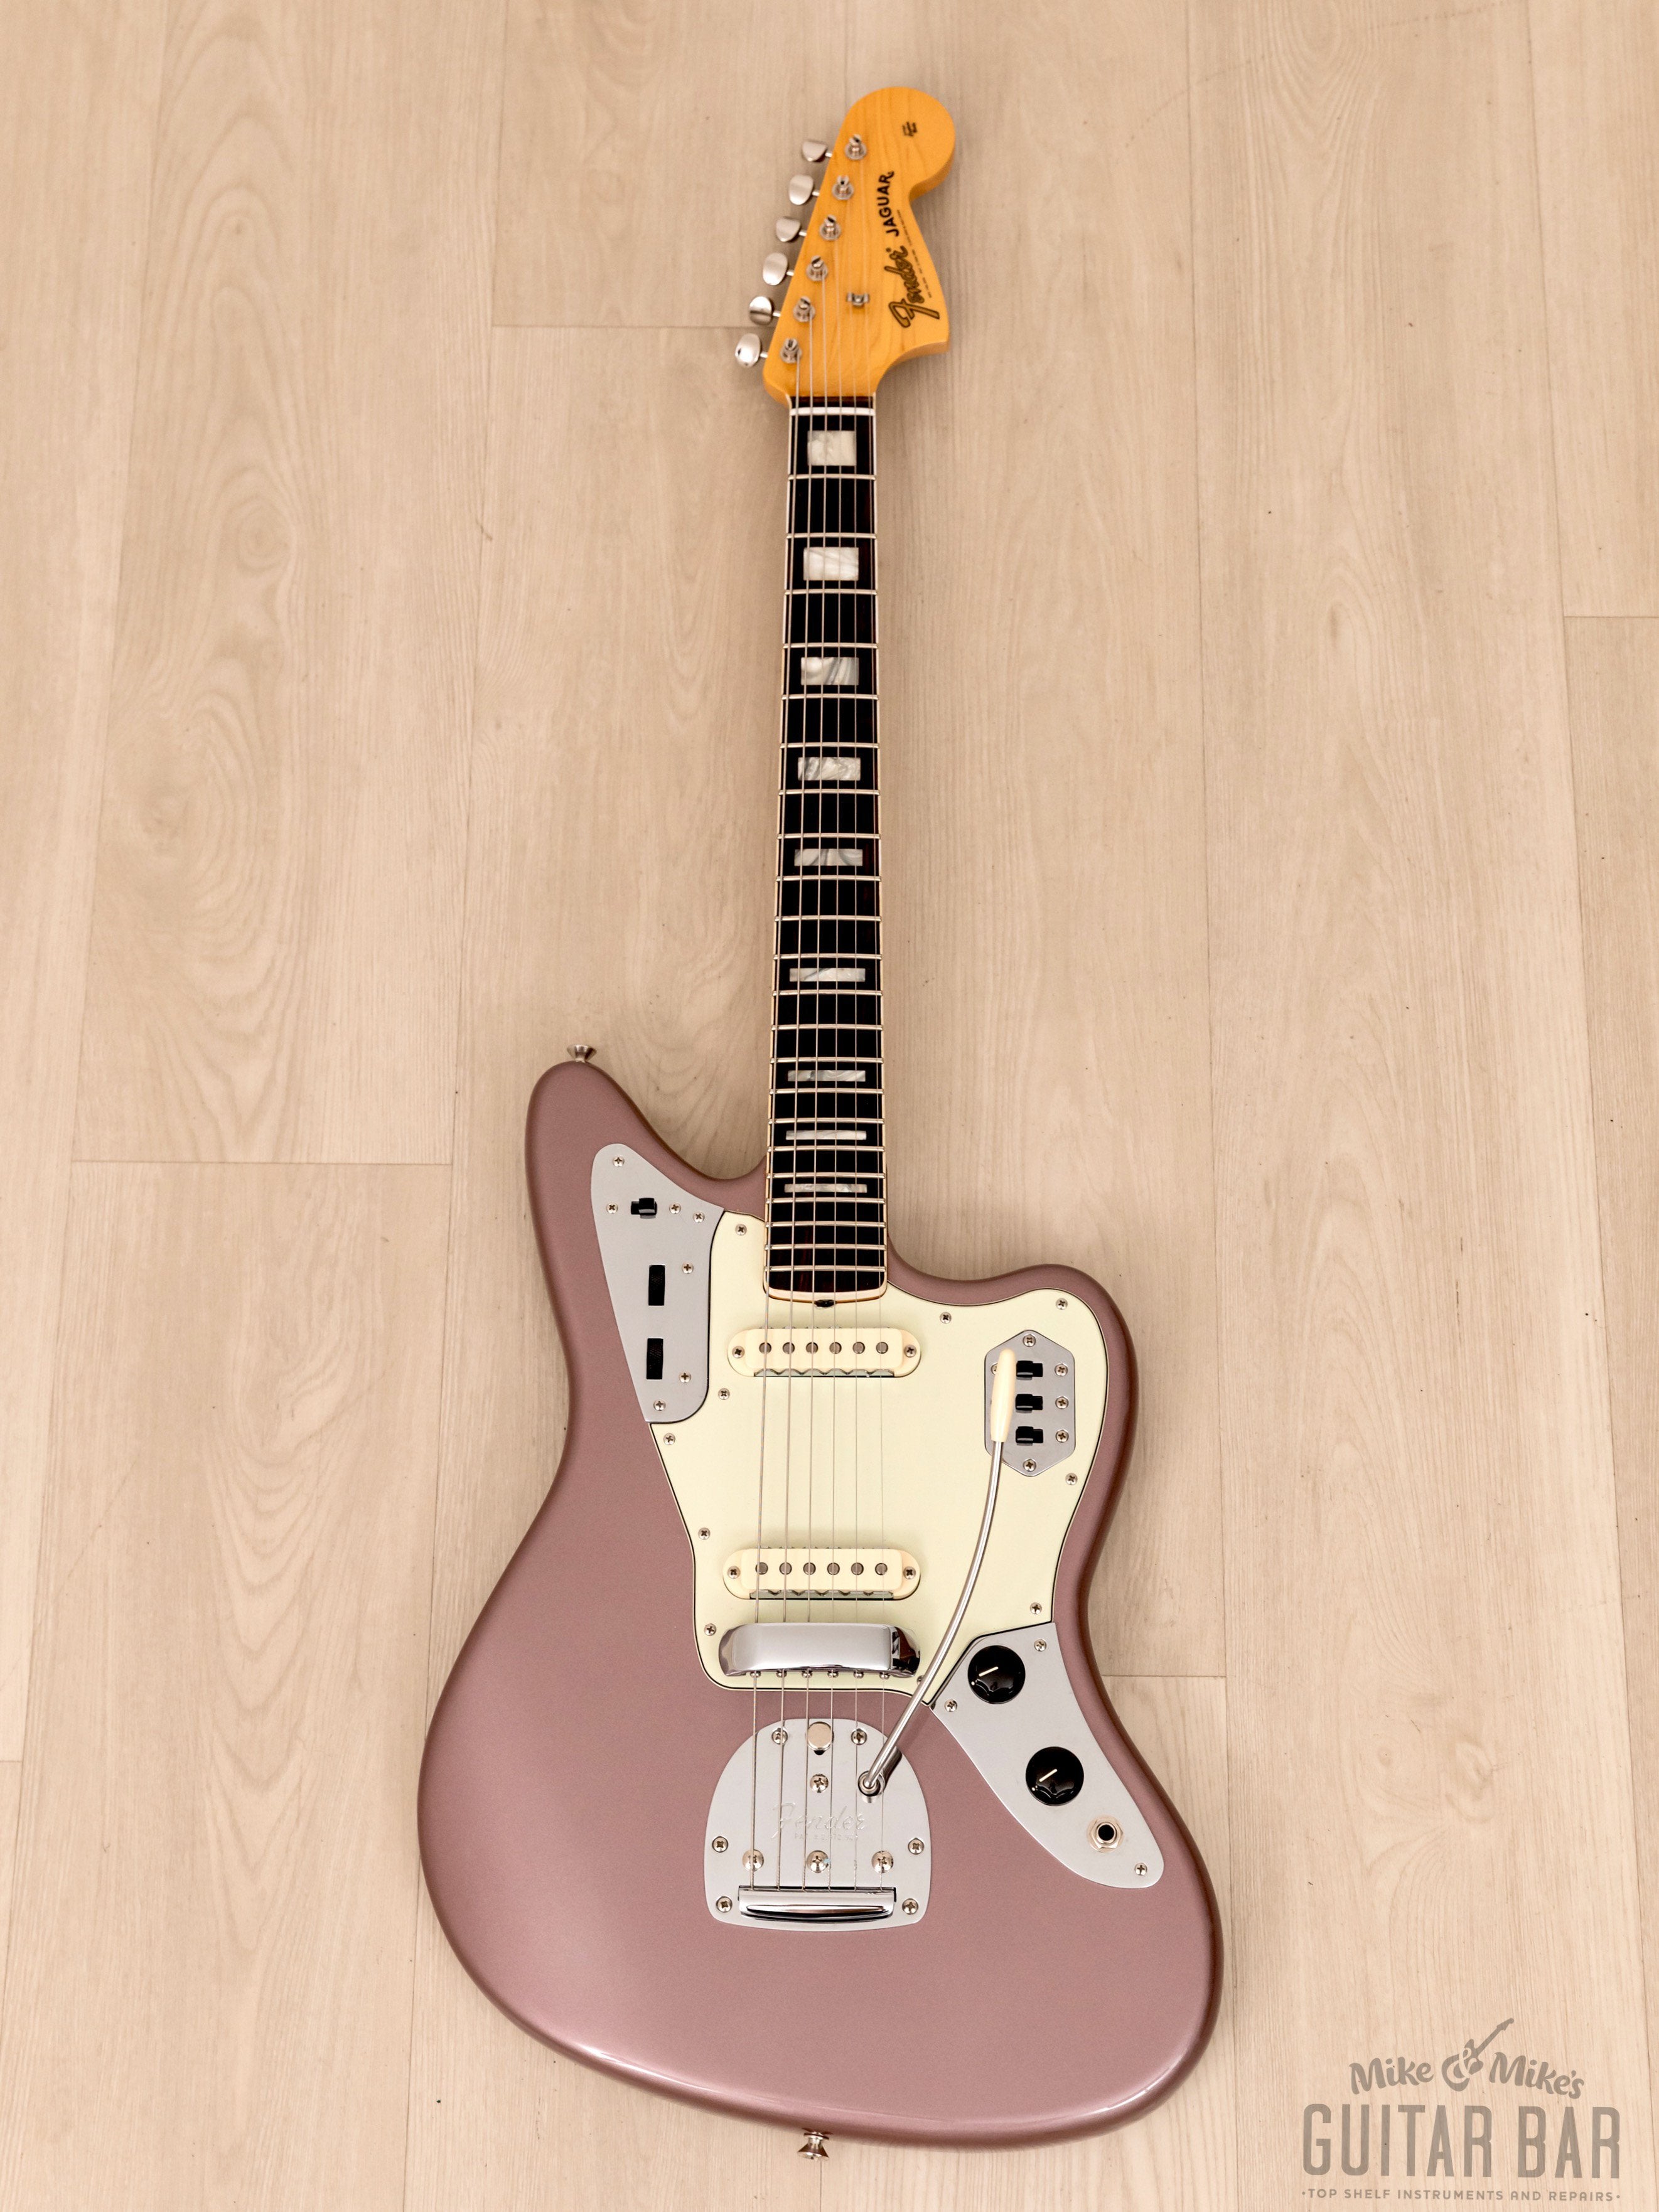 2012 Fender 50th Anniversary Jaguar Offset Guitar Burgundy Mist Lacquer, USA-Made w/ Case & Tags, 1 of 50